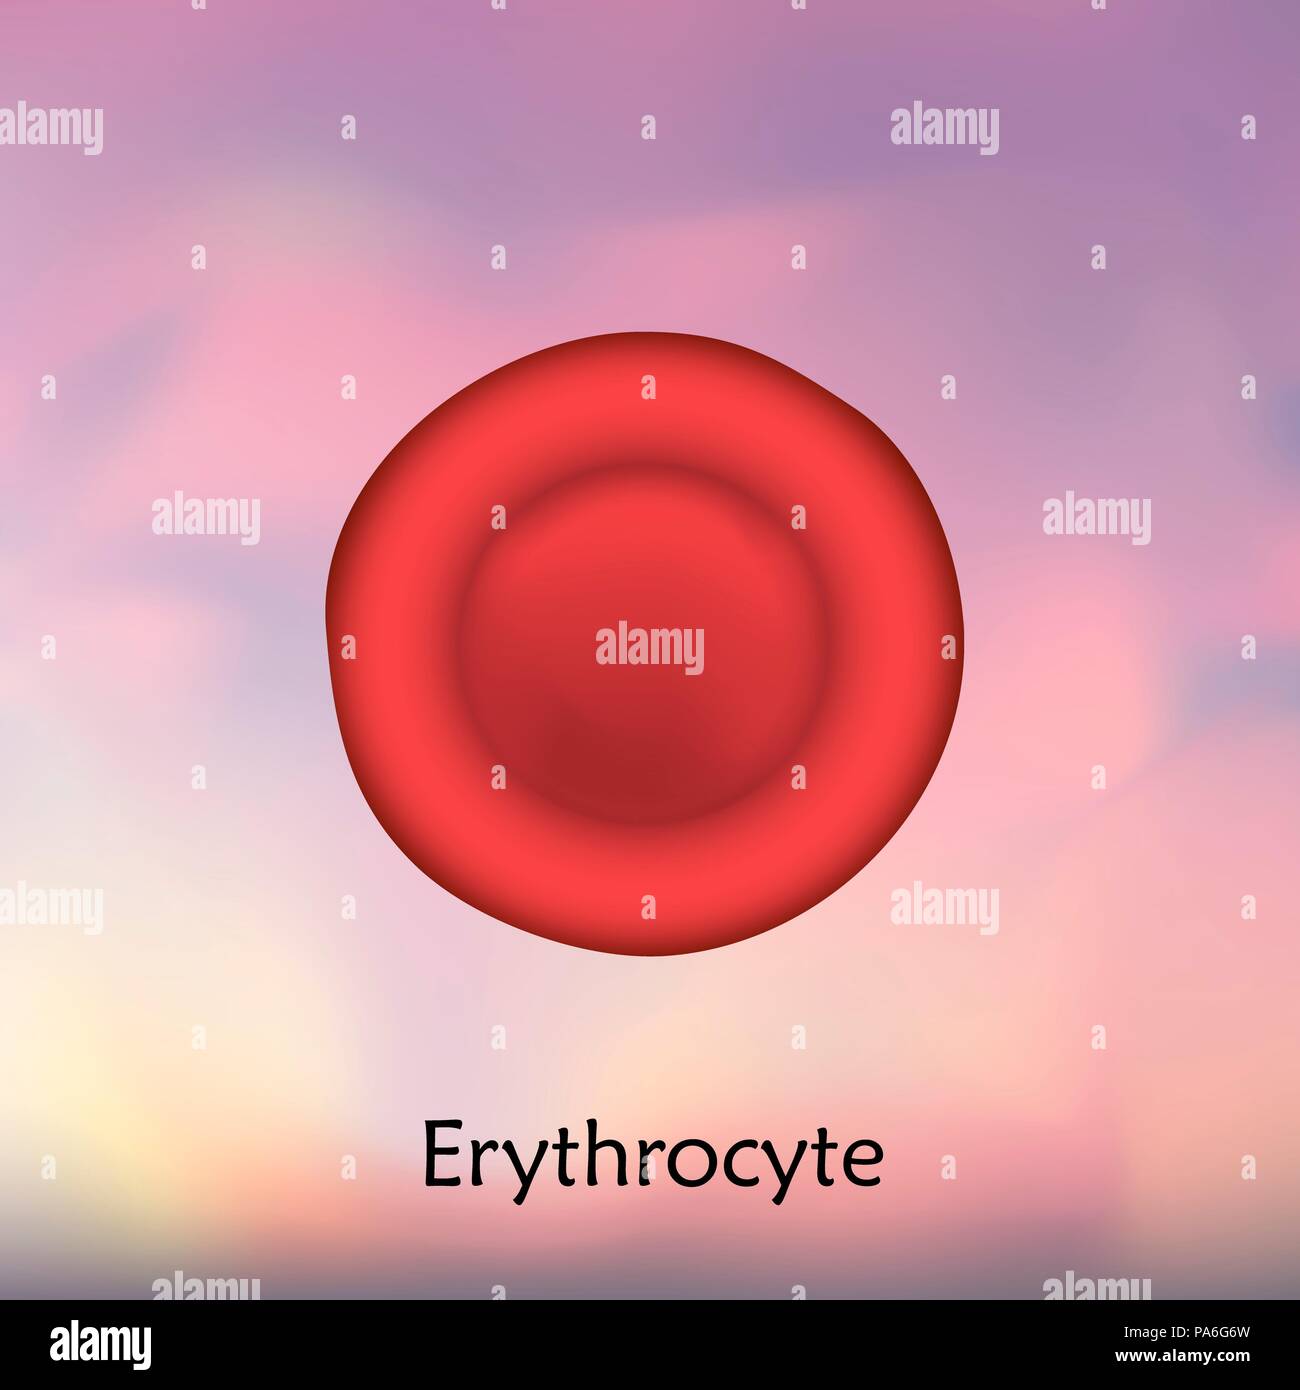 Erythrocyte red blood cell, illustration. Stock Photo